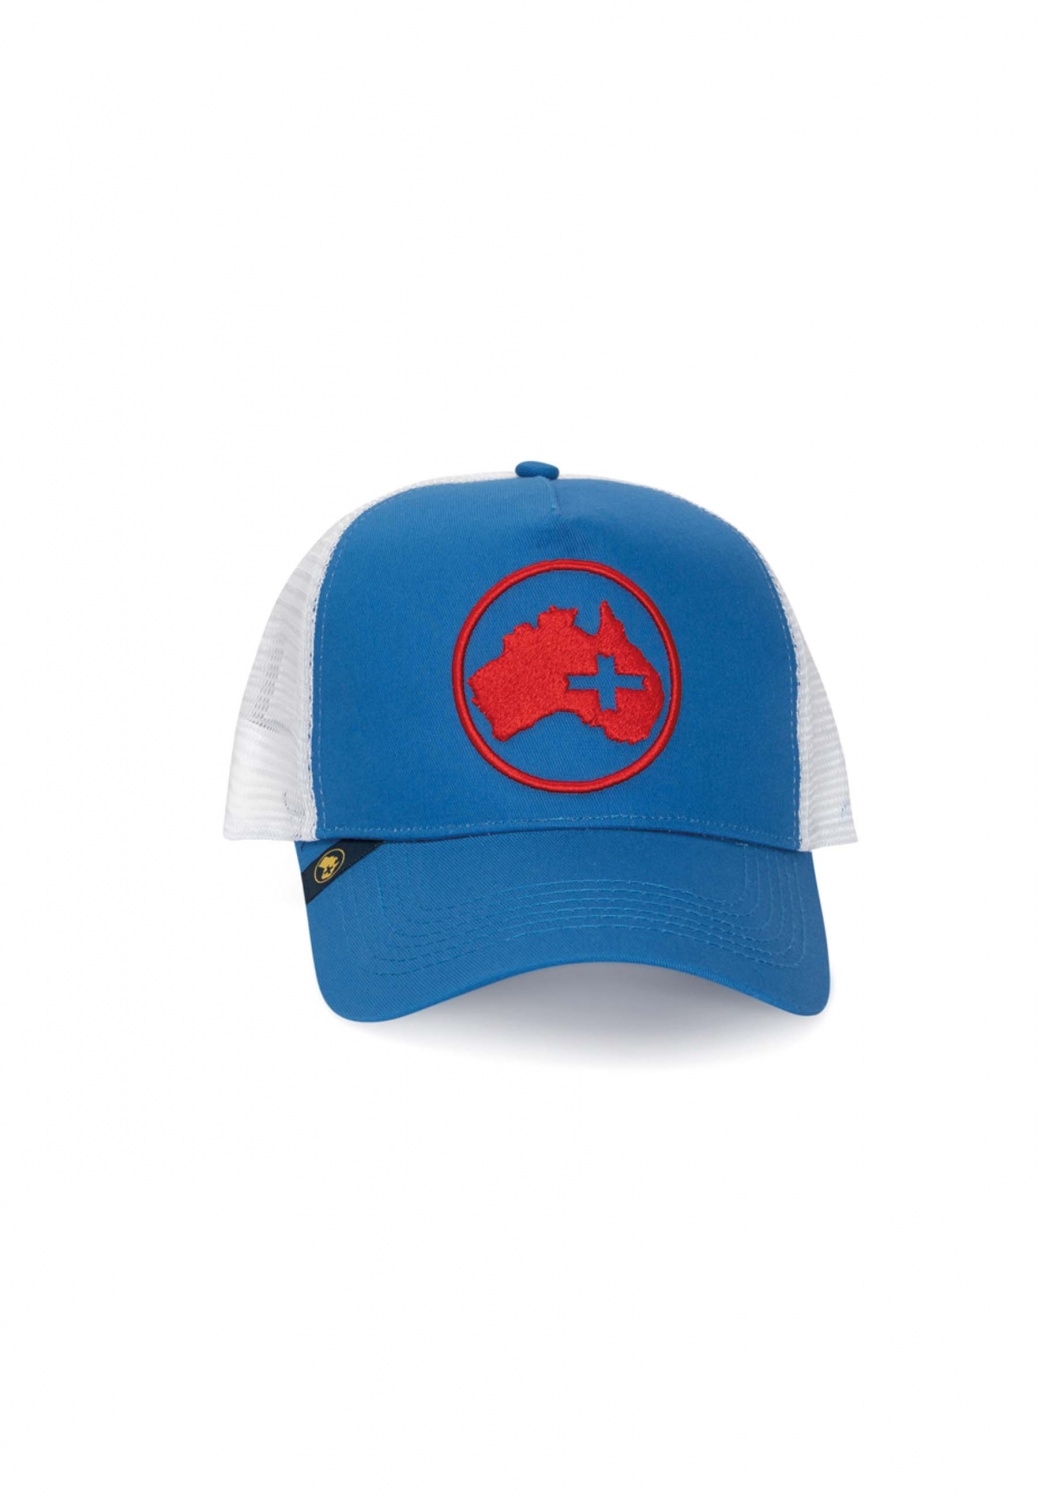 BLUE AND RED CAP